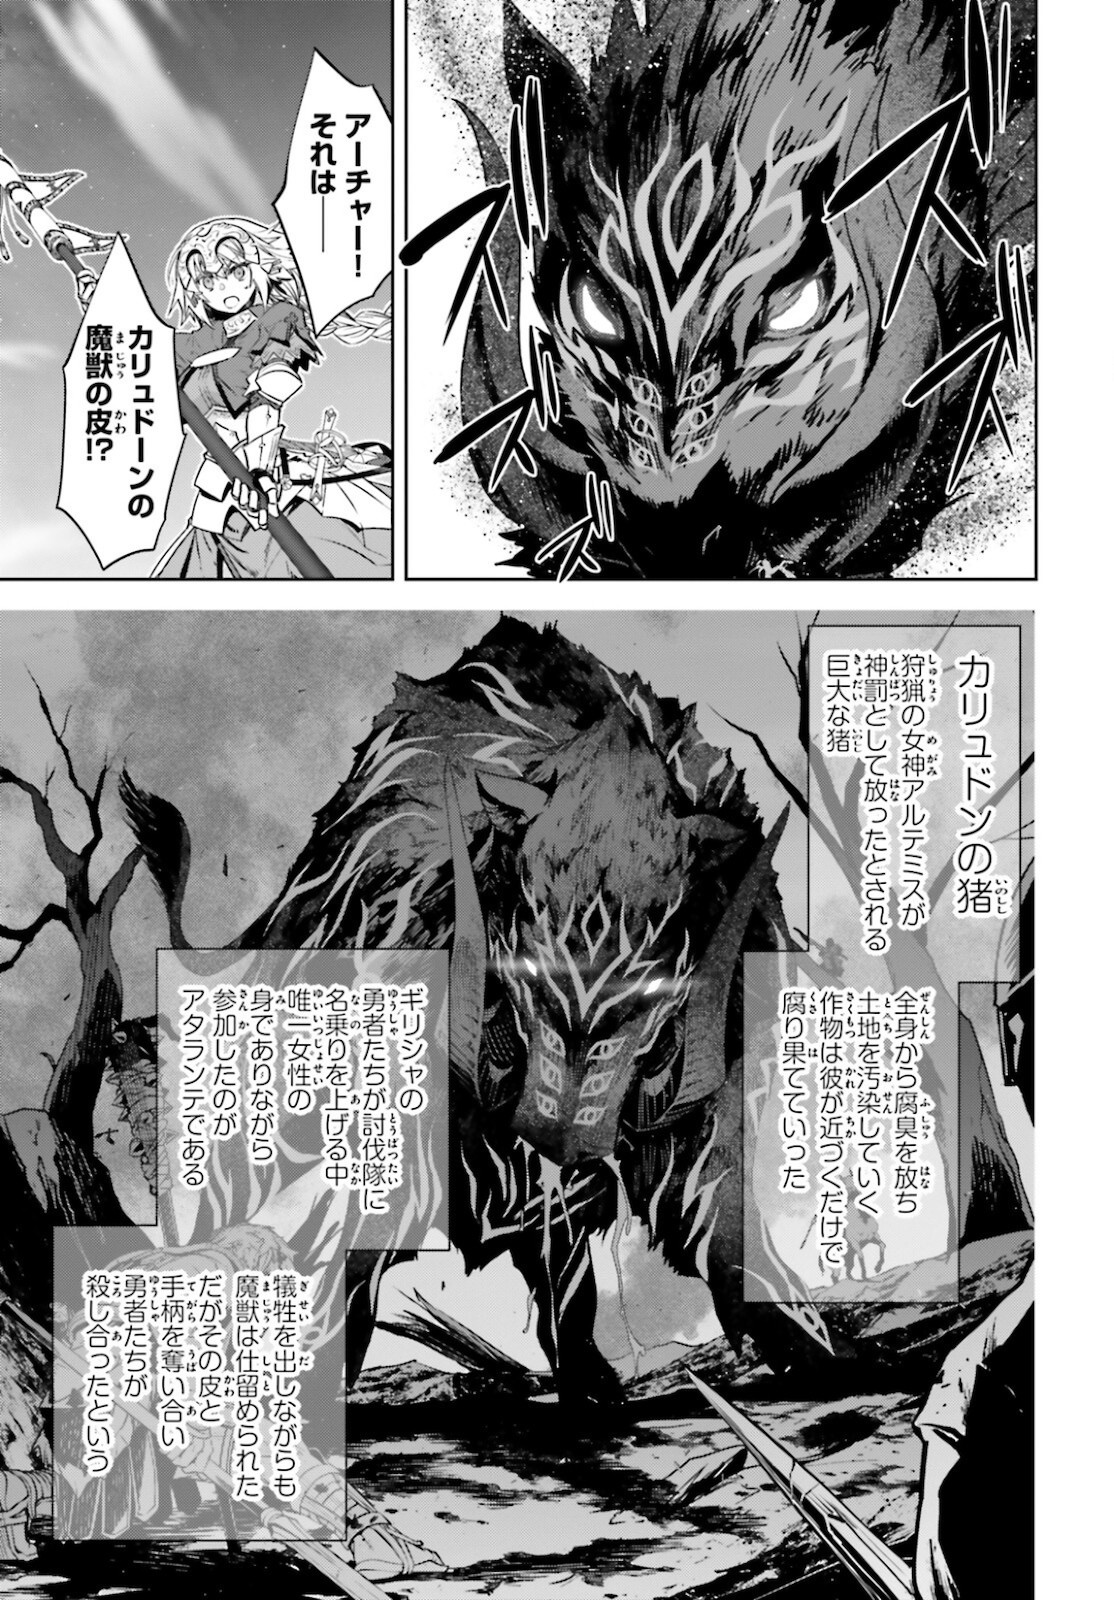 Fate-Apocrypha - Chapter 55-1 - Page 7